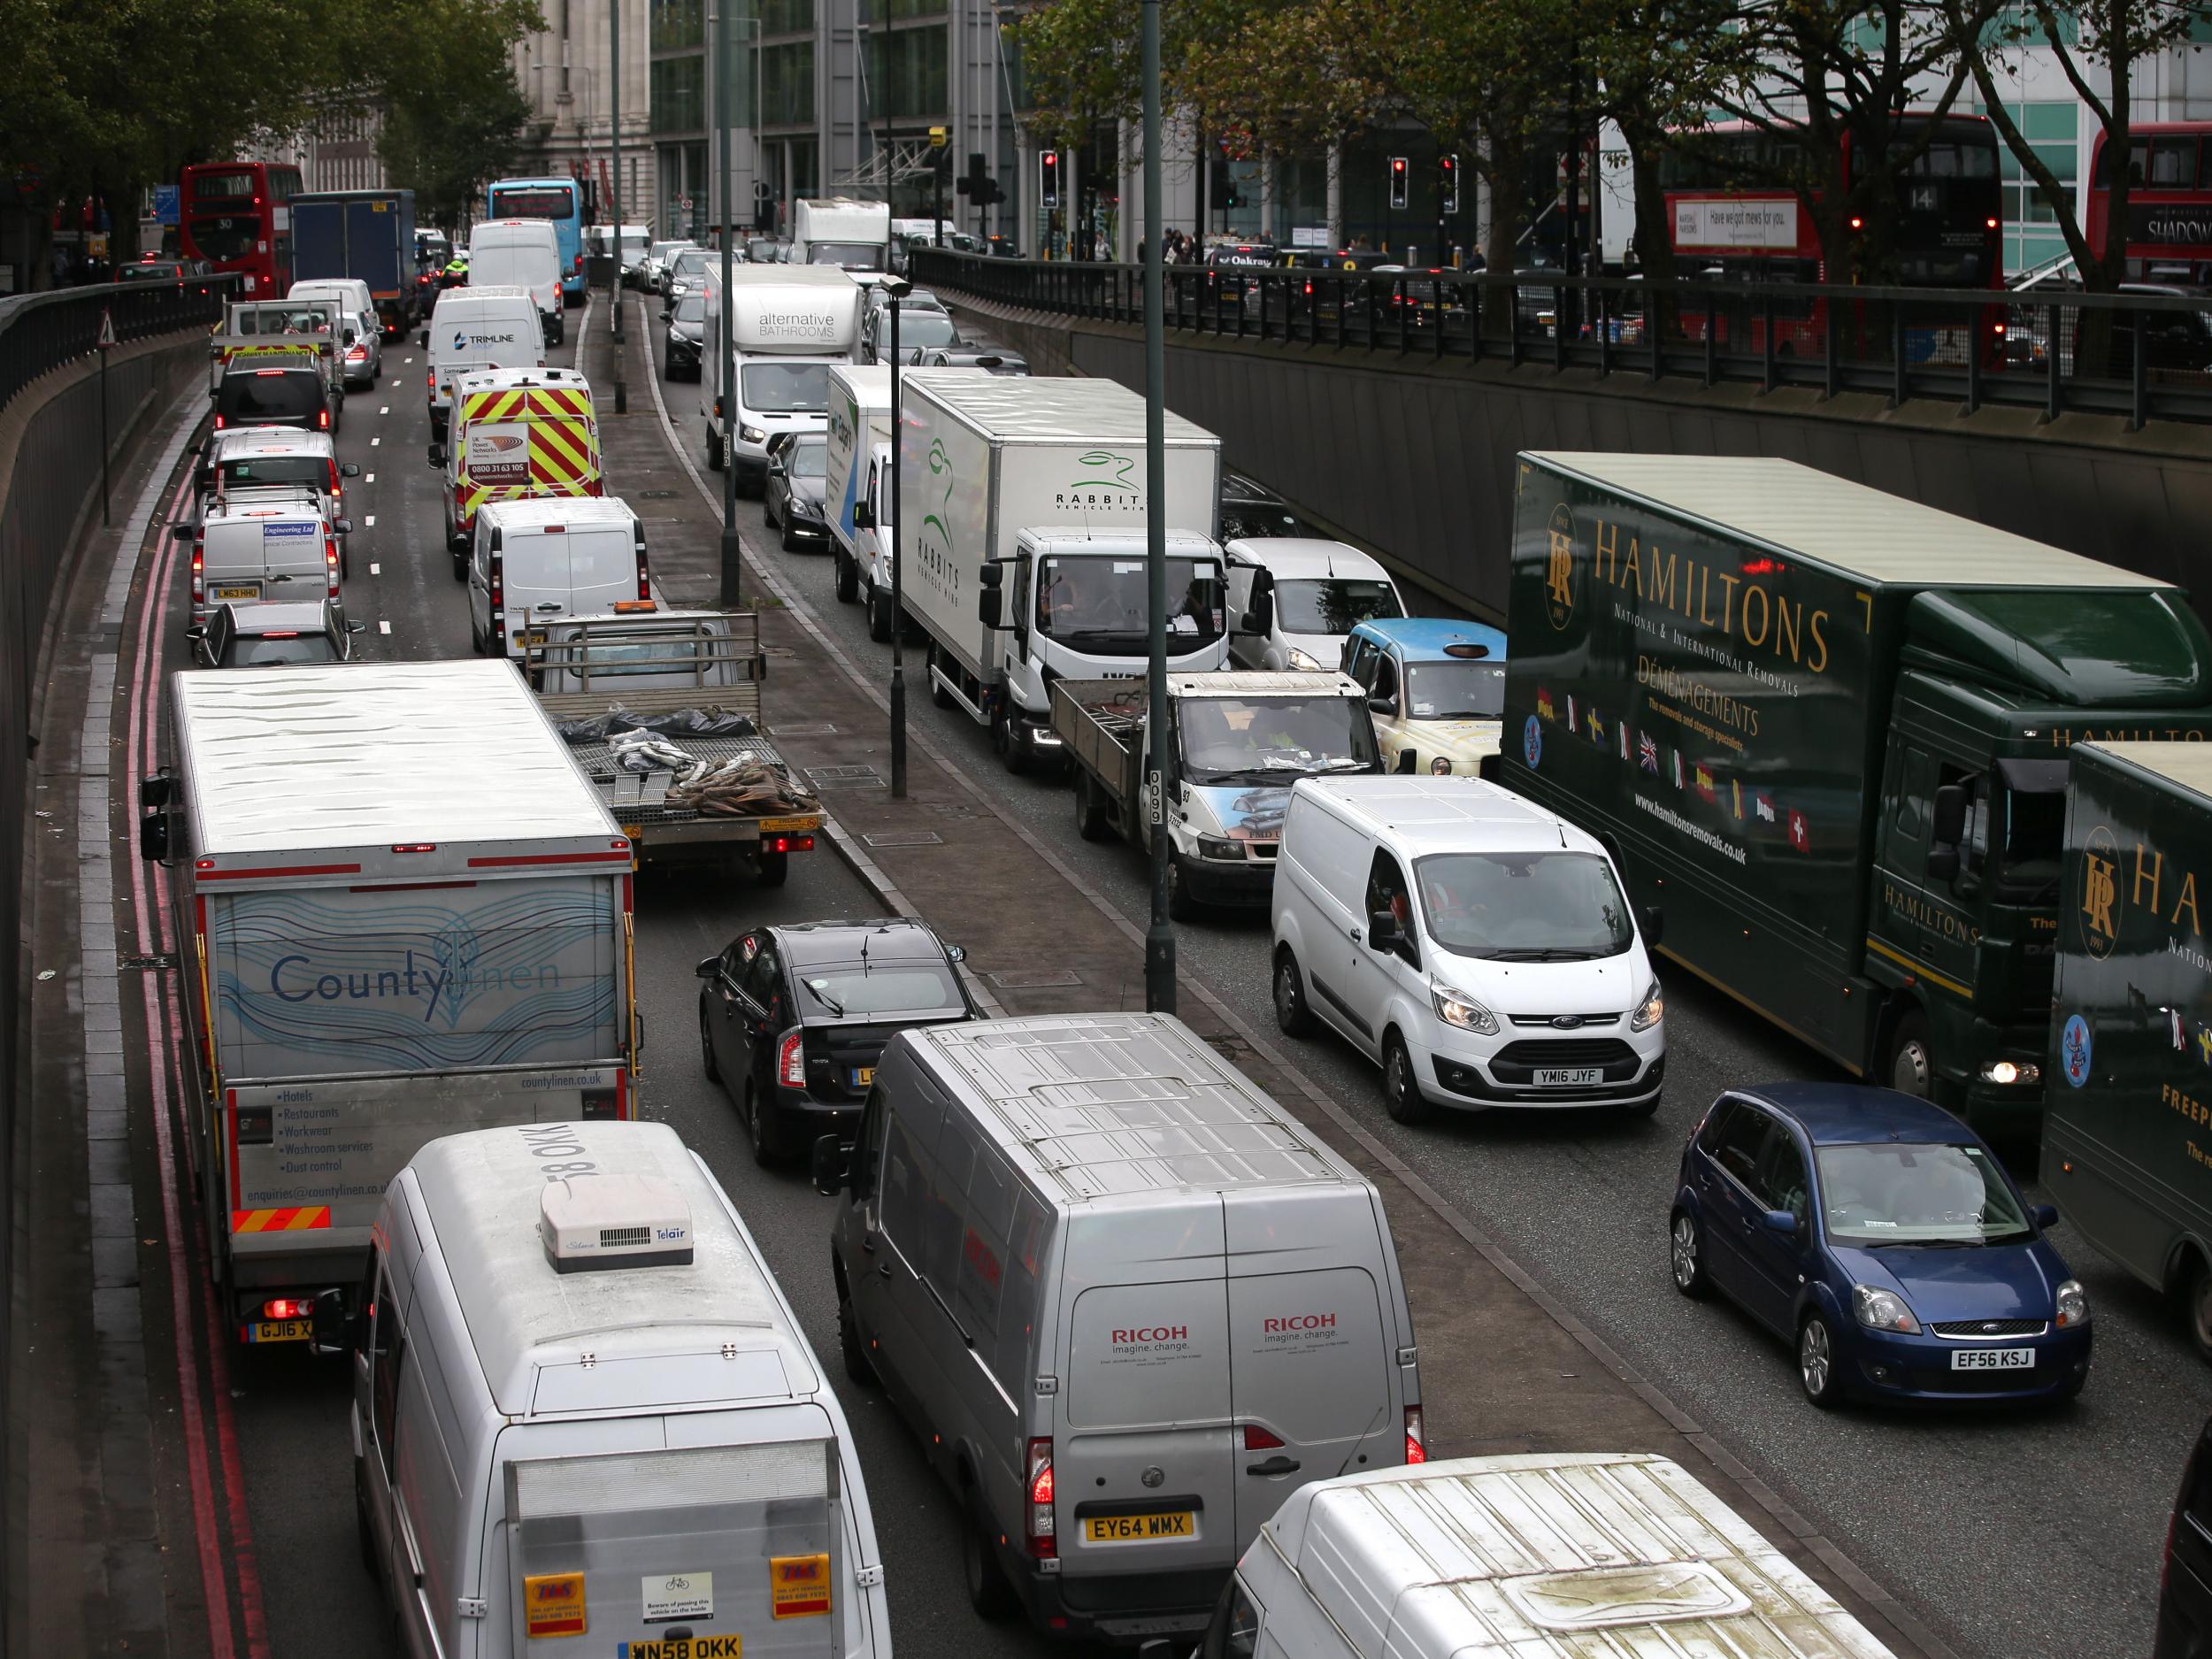 Traffic jams are predicted for the bank holiday weekend